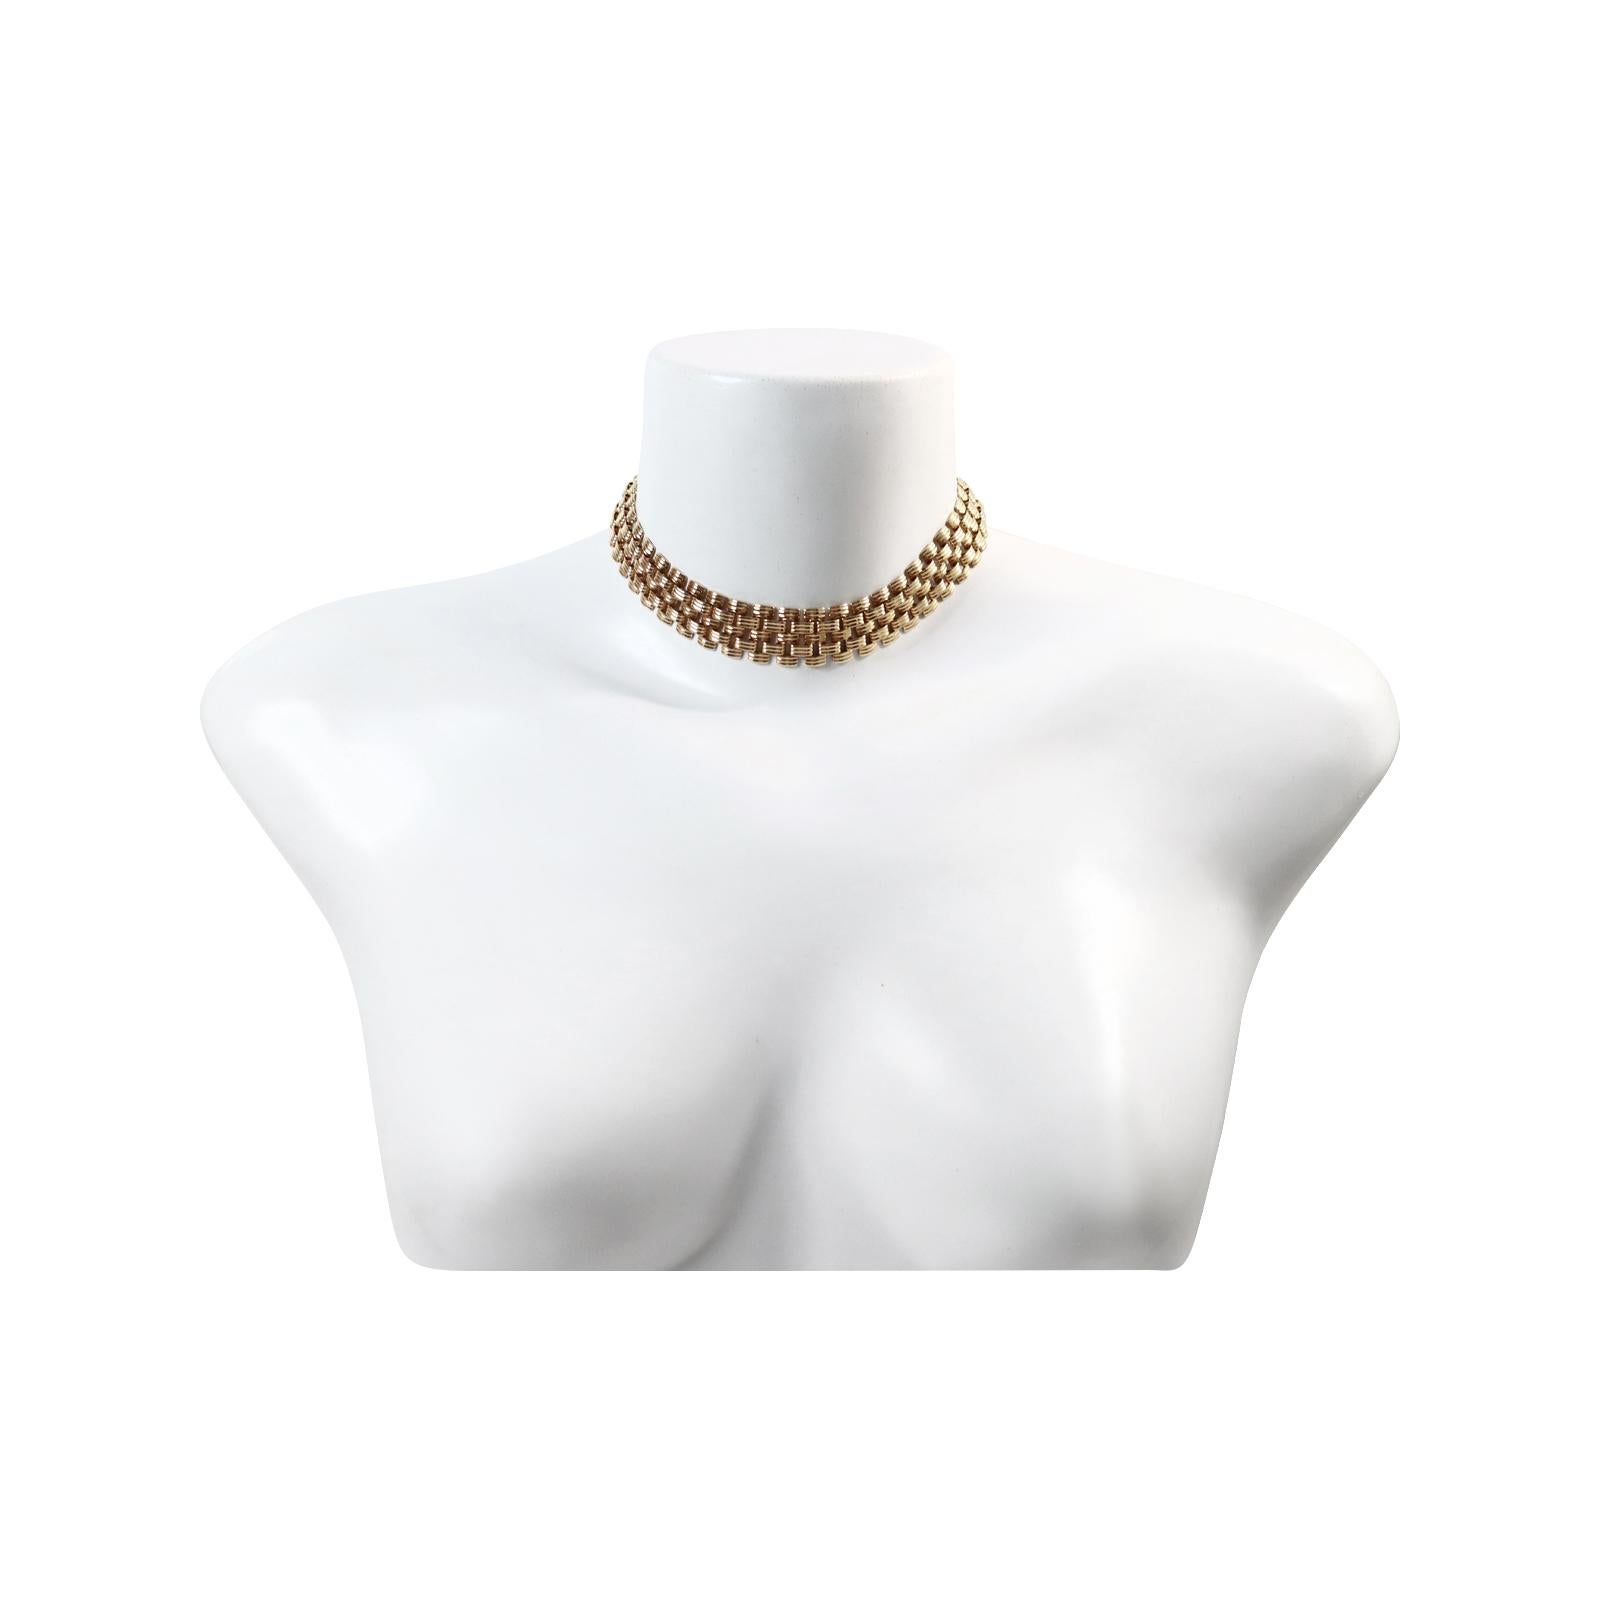 Vintage Vendome Gold Tone Basket Weave Choker Necklace, circa 1980s In Good Condition For Sale In New York, NY